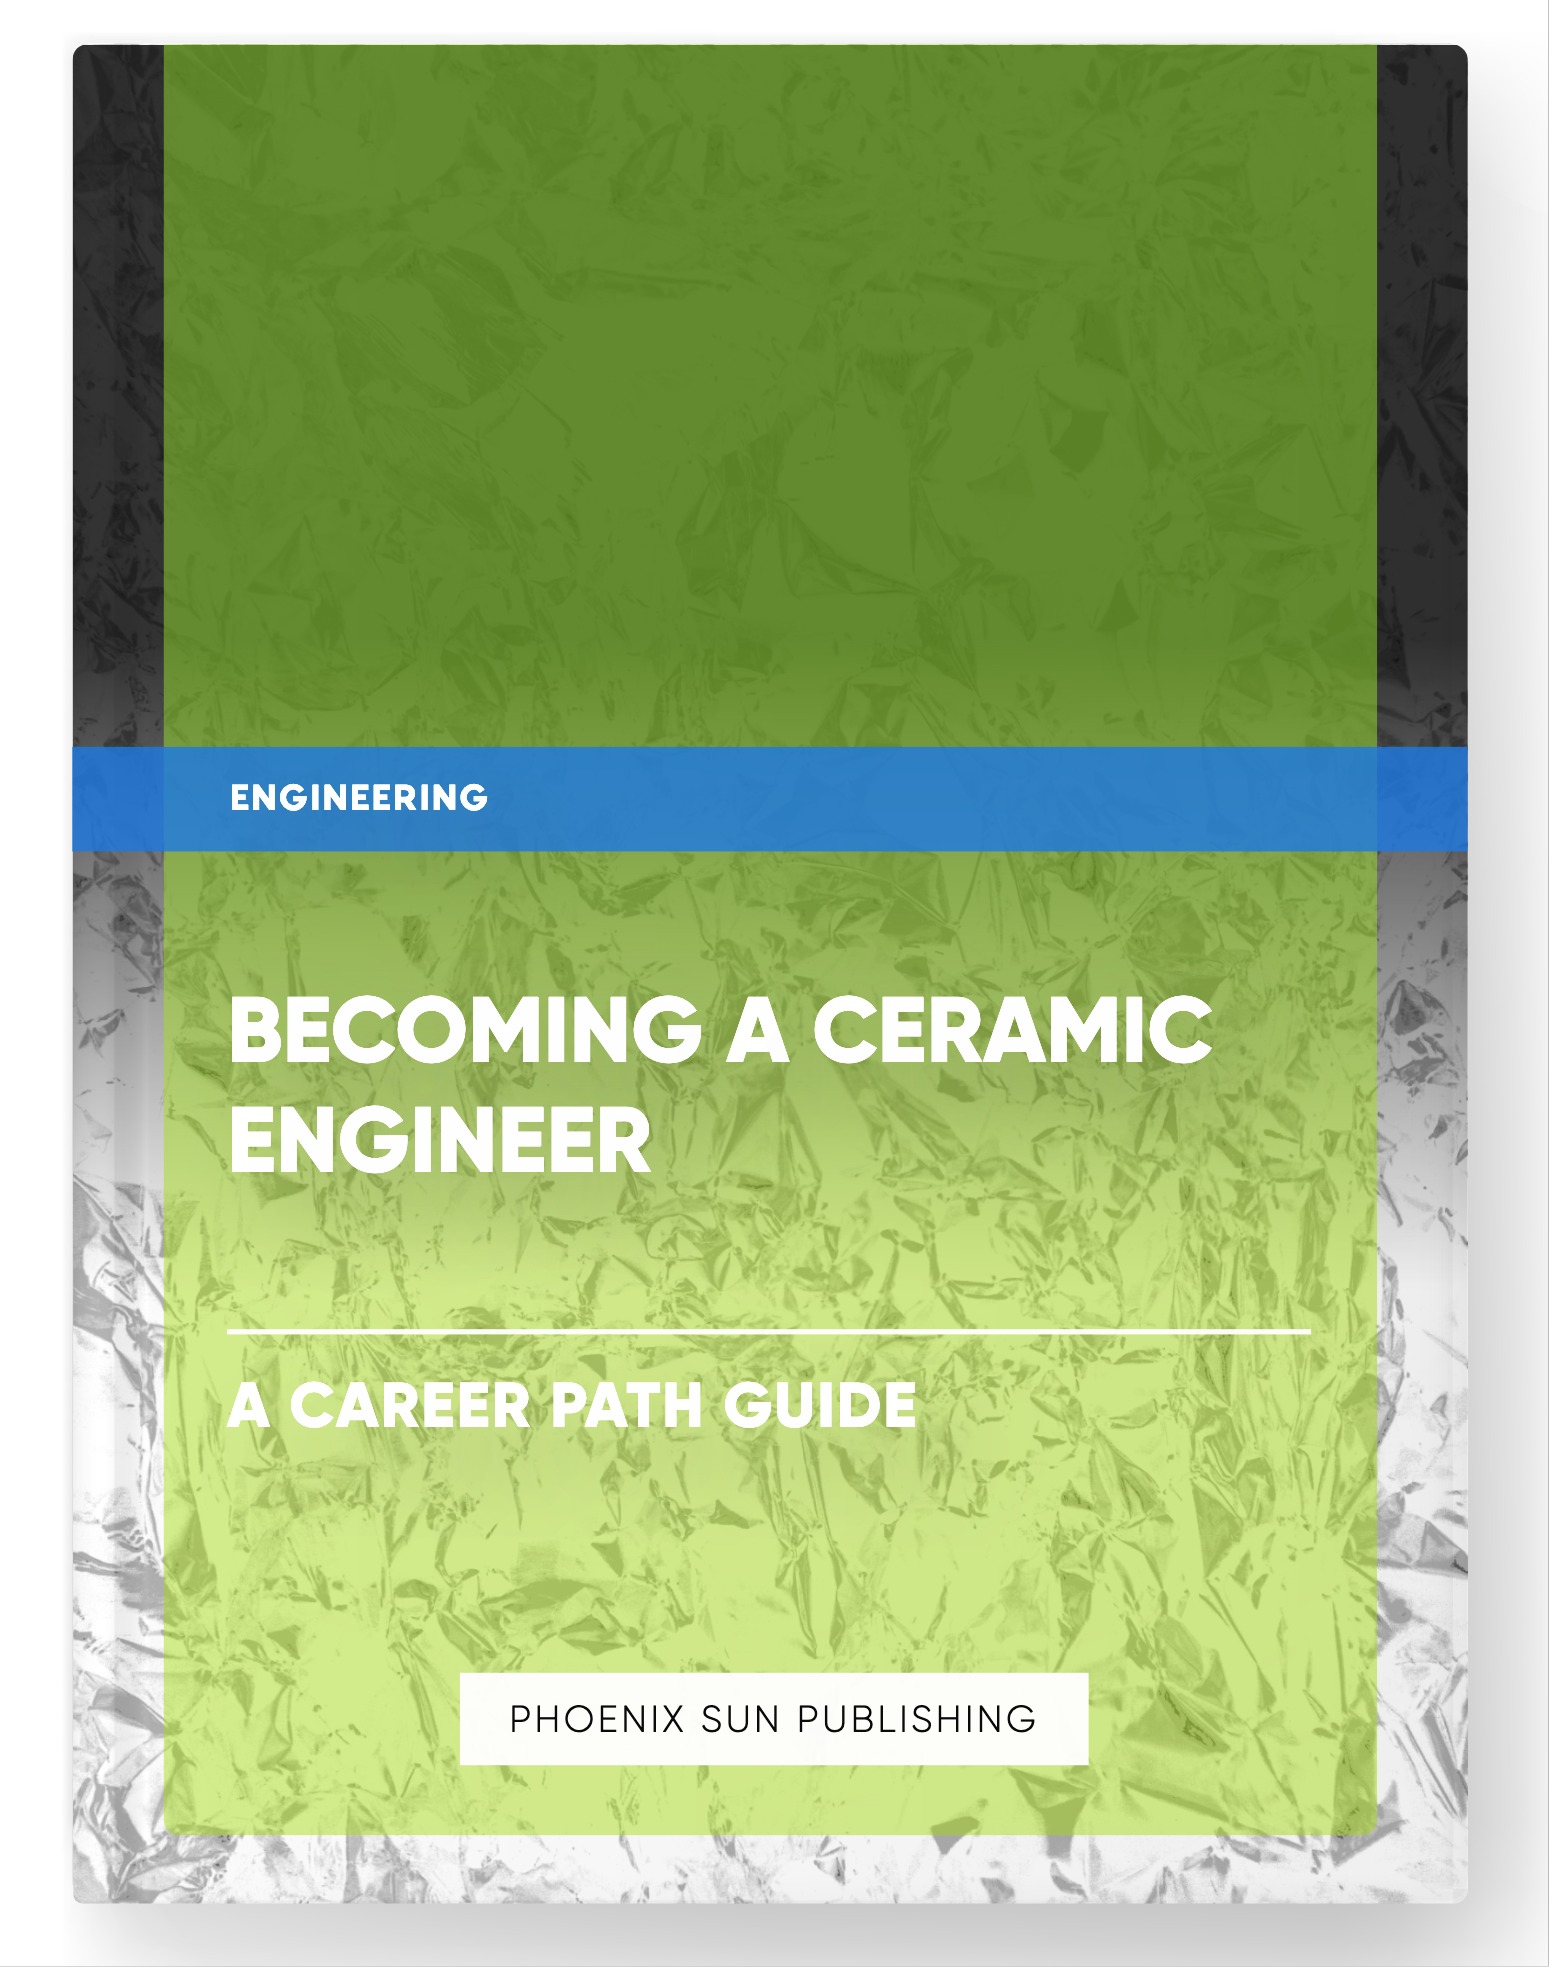 Becoming a Ceramic Engineer – A Career Path Guide